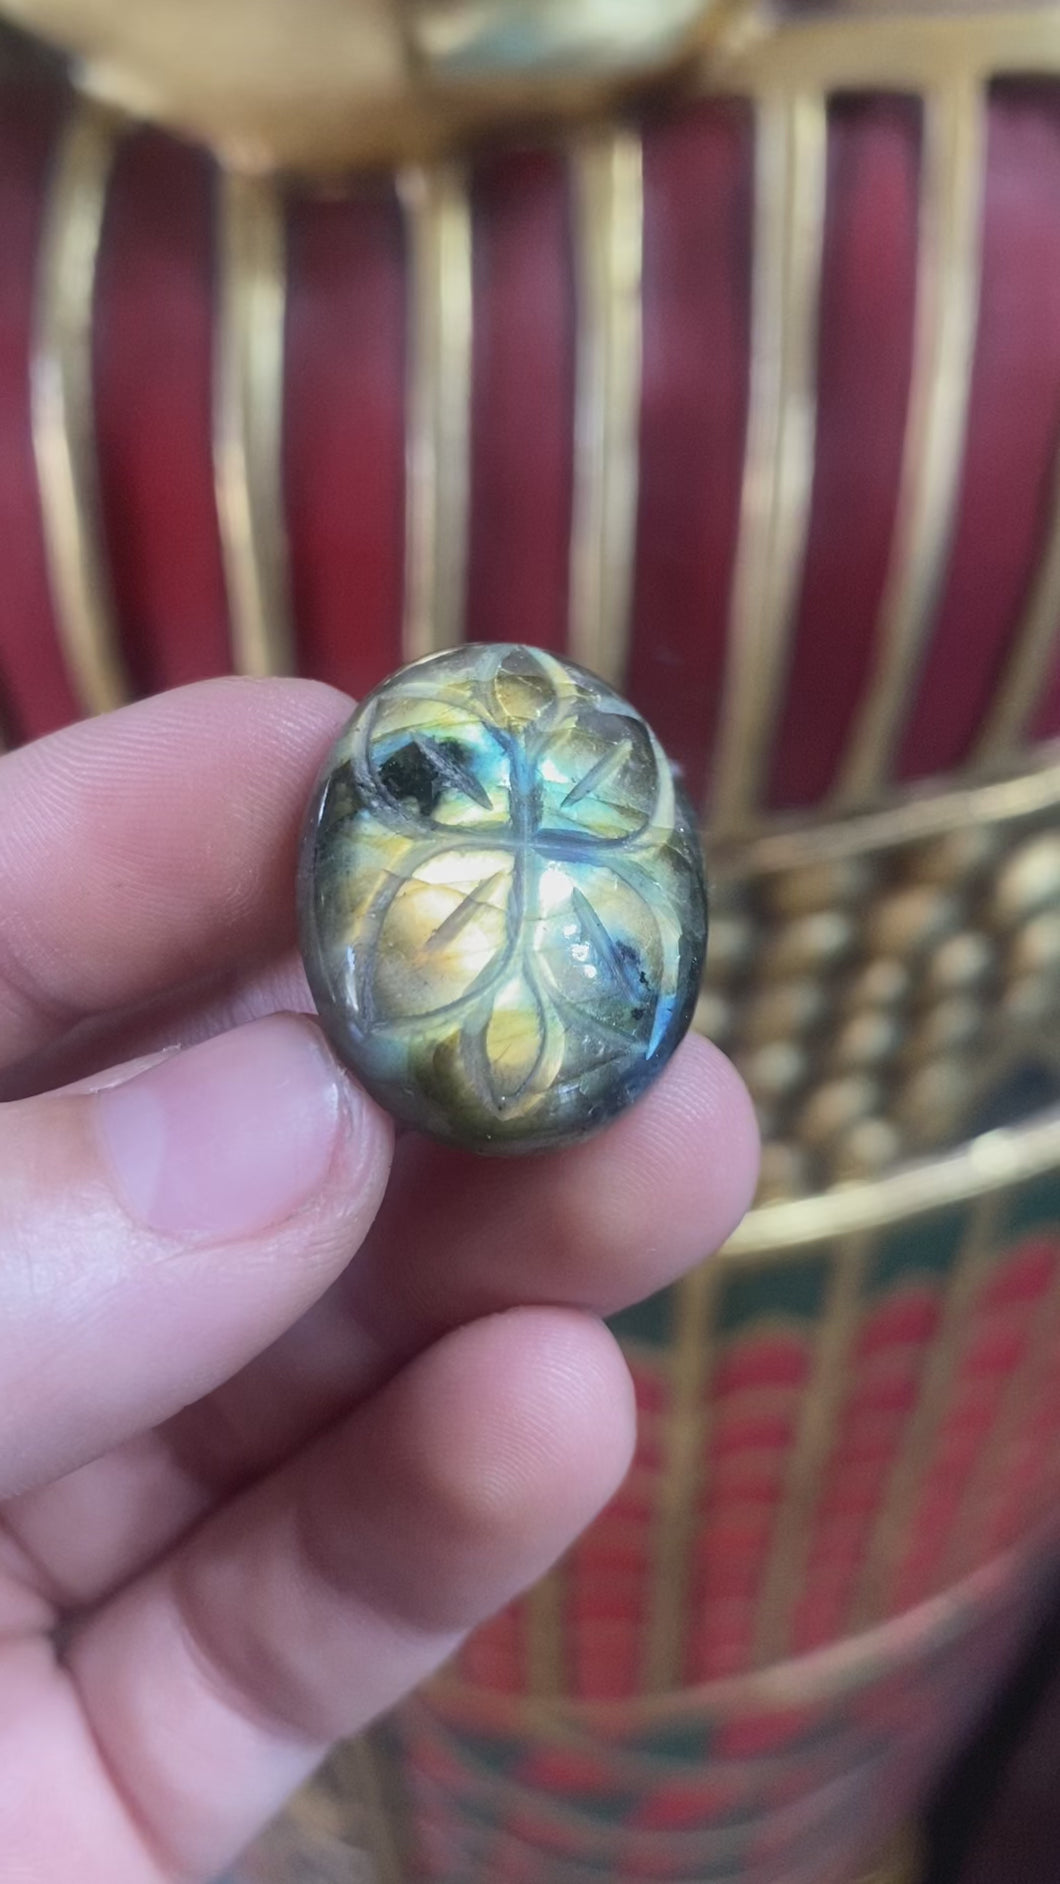 Polished Labradorite with Flower #2